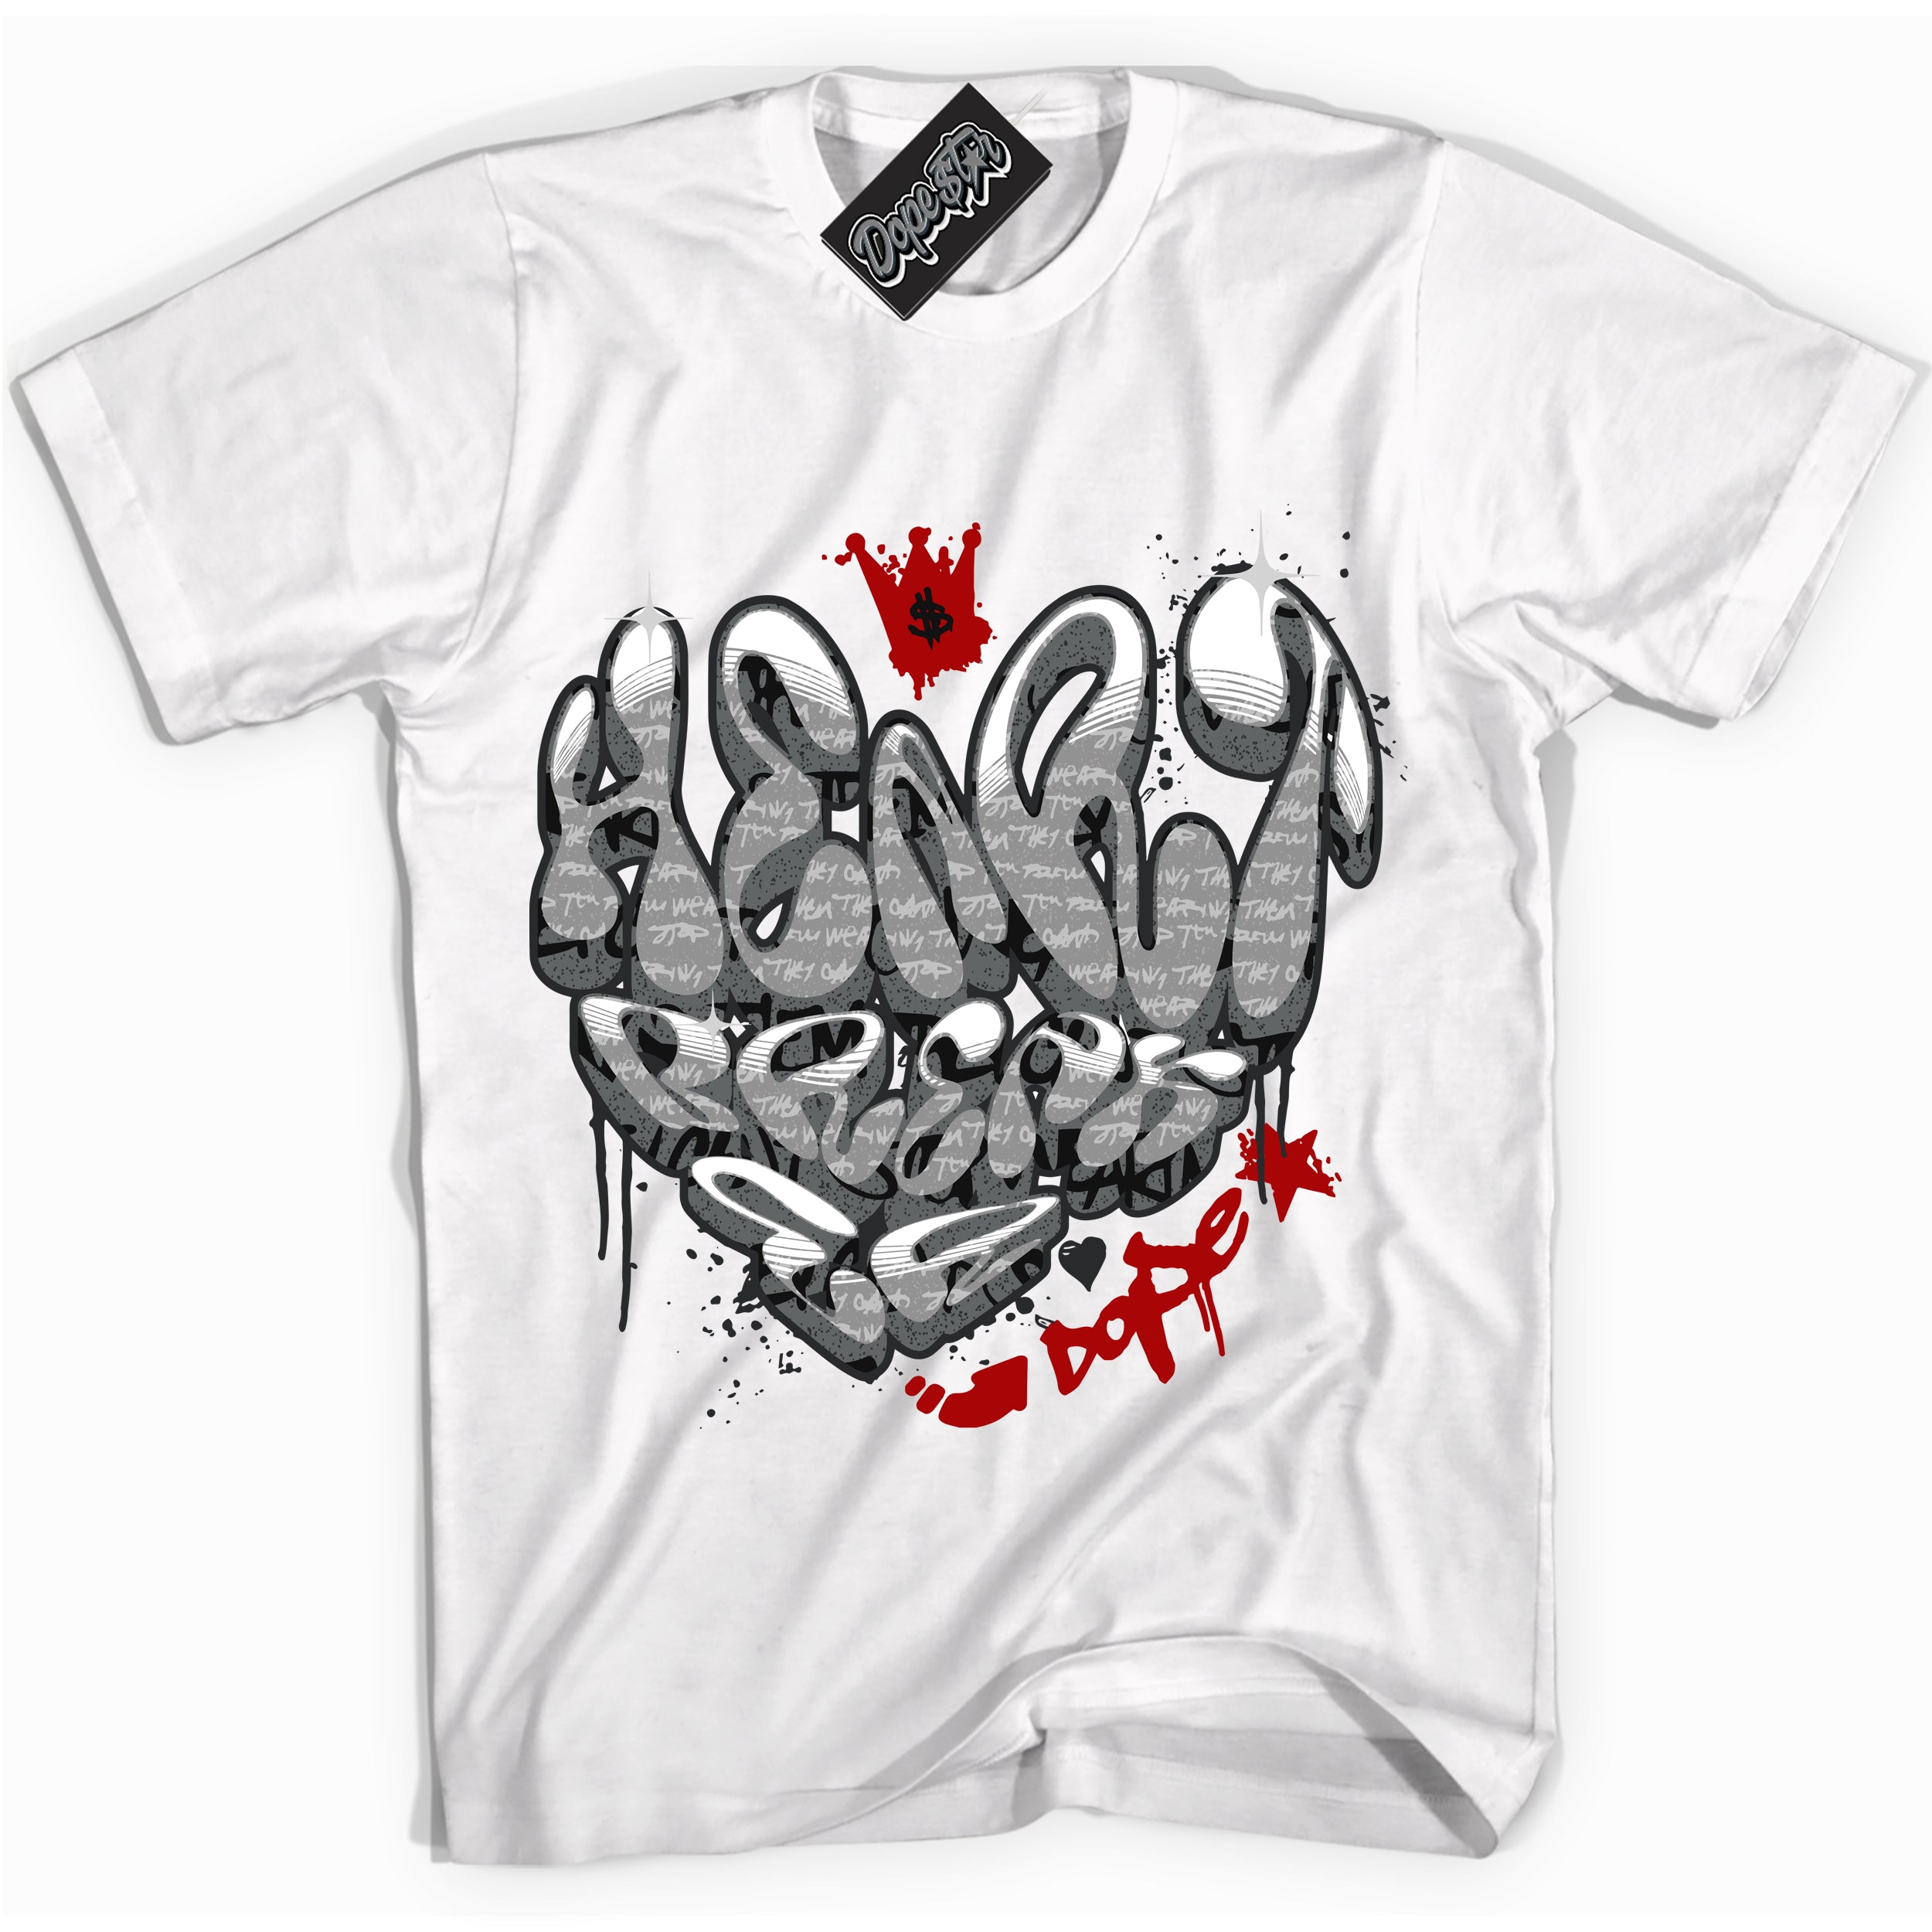 Cool White Shirt with “ Heartbreaker Graffiti ” design that perfectly matches Rebellionaire 1s Sneakers.